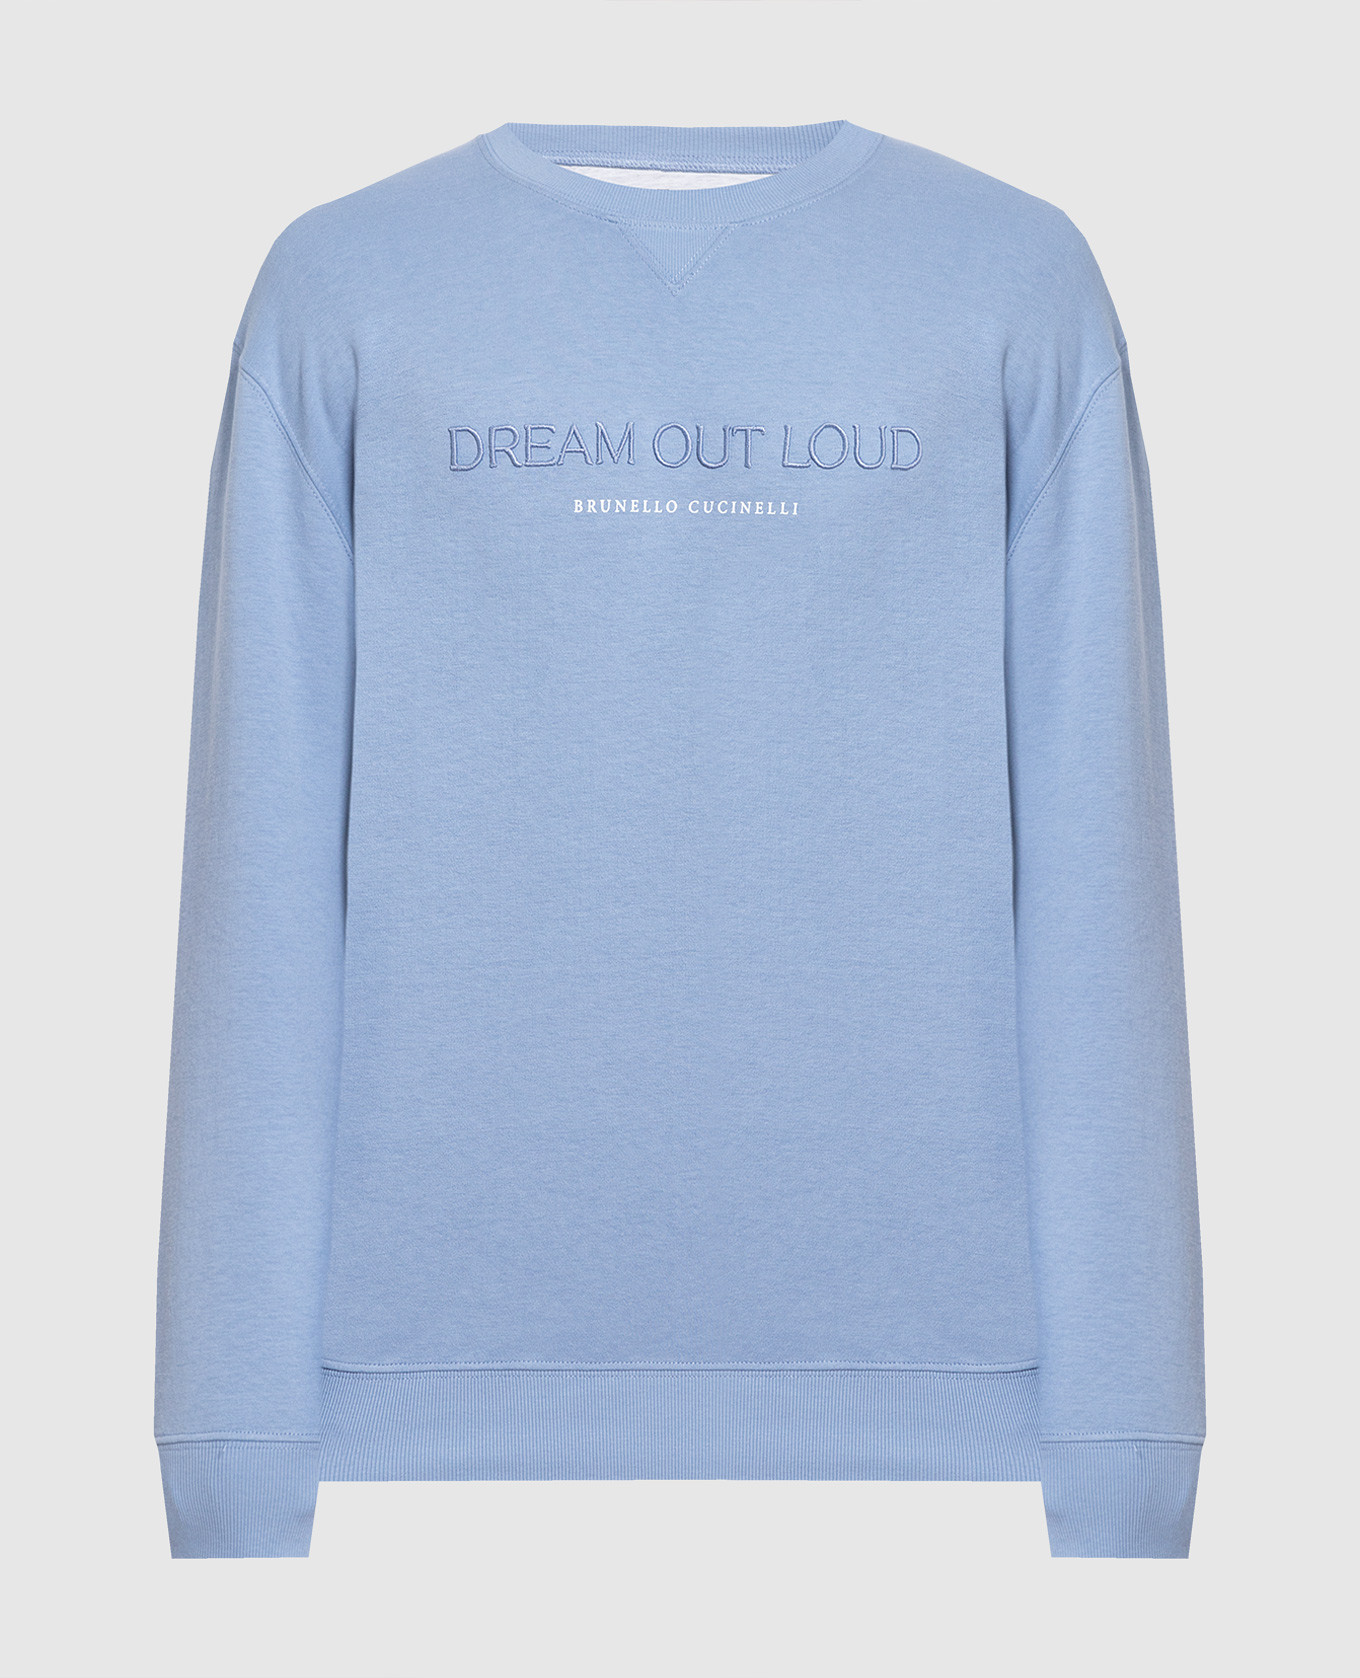 Blue sweatshirt with Dream out loud embroidery